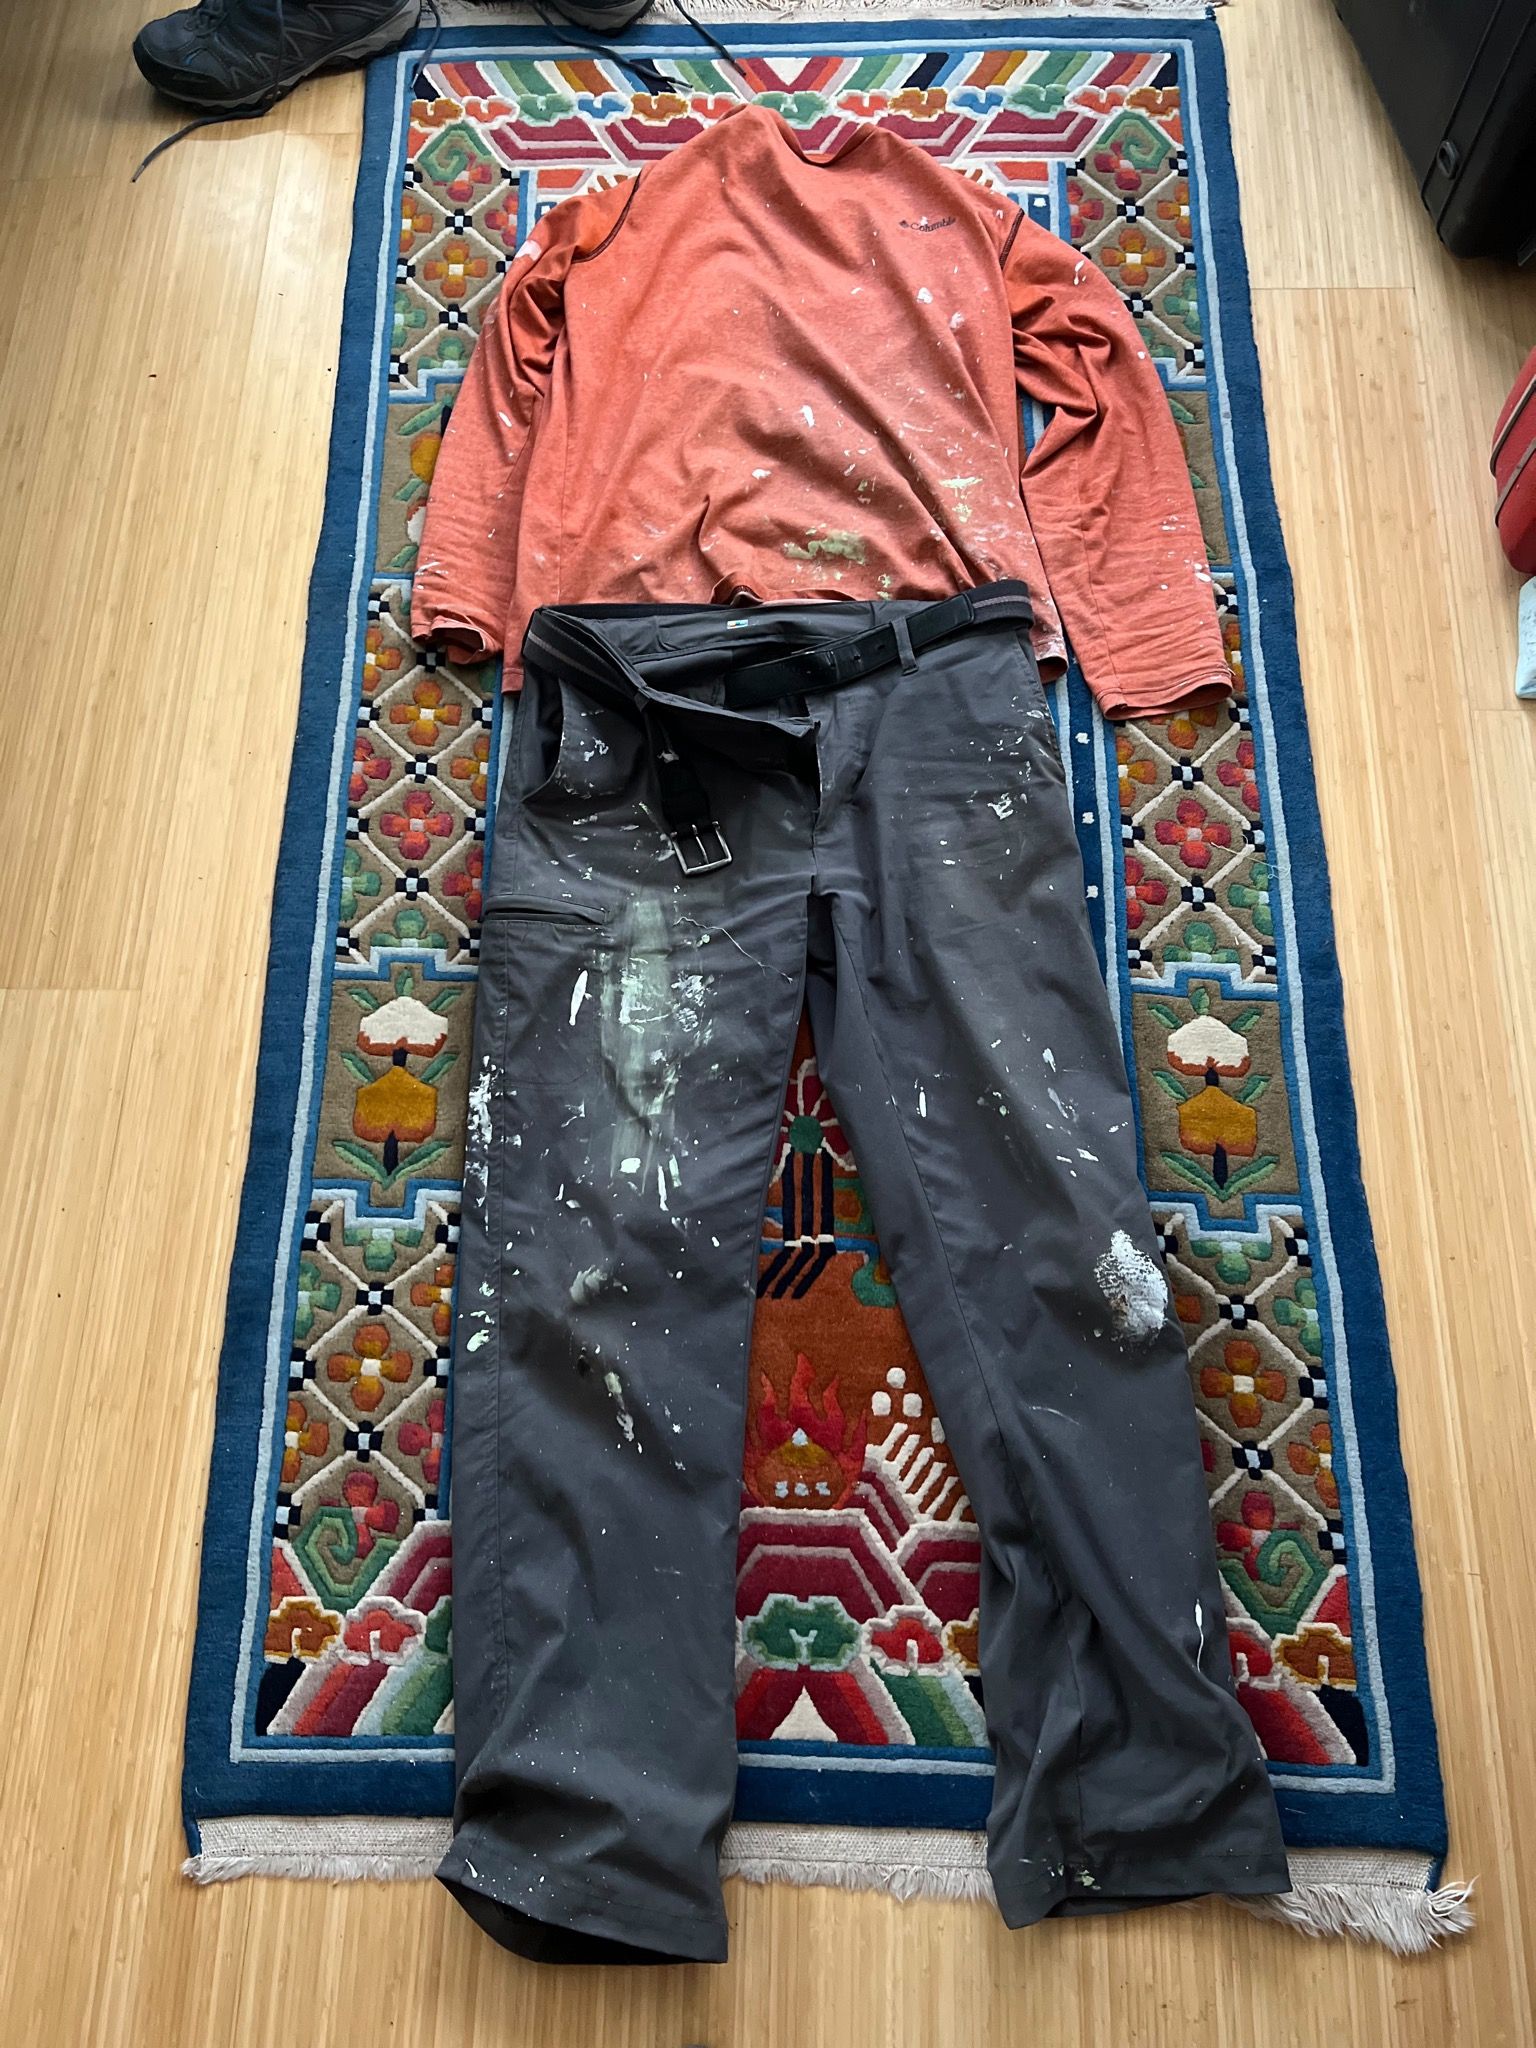 A pair of pants and shirt laid out on the floor. The clothes are dirty and covered in paint marks.